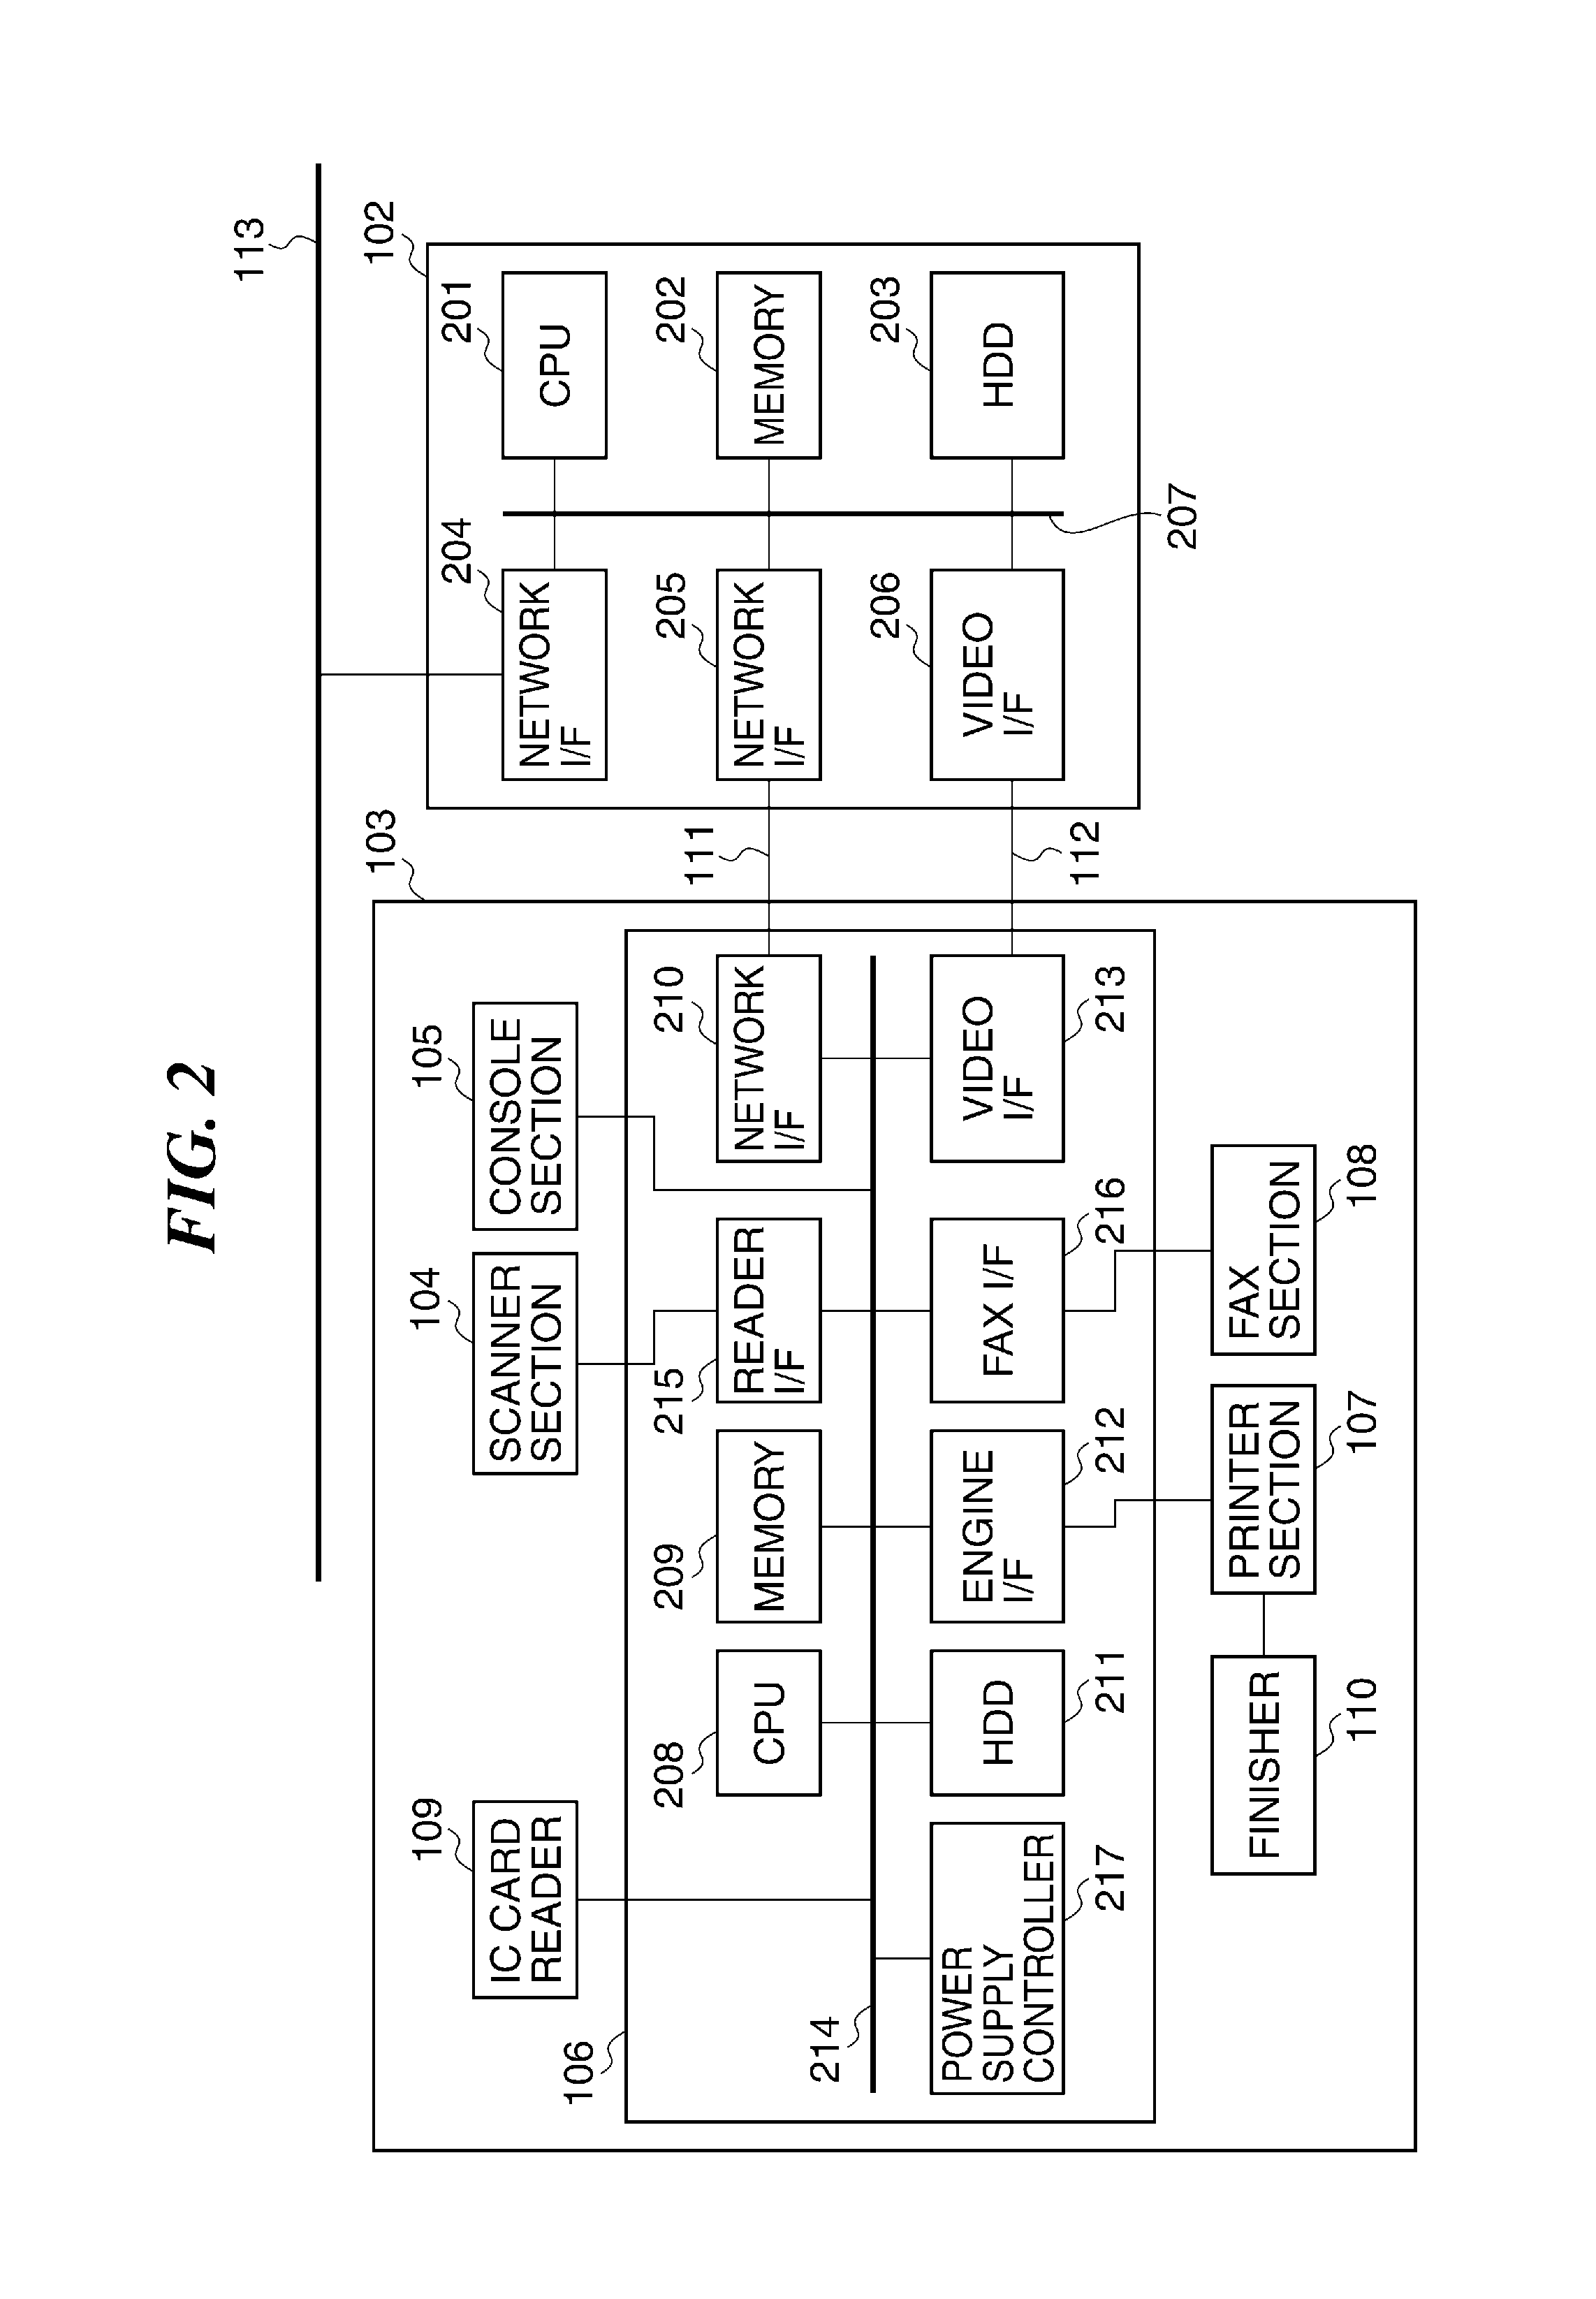 Image processing controller for performing image processing in cooperation with image forming apparatus, image forming system including image processing controller, method of controlling image forming system, and storage medium